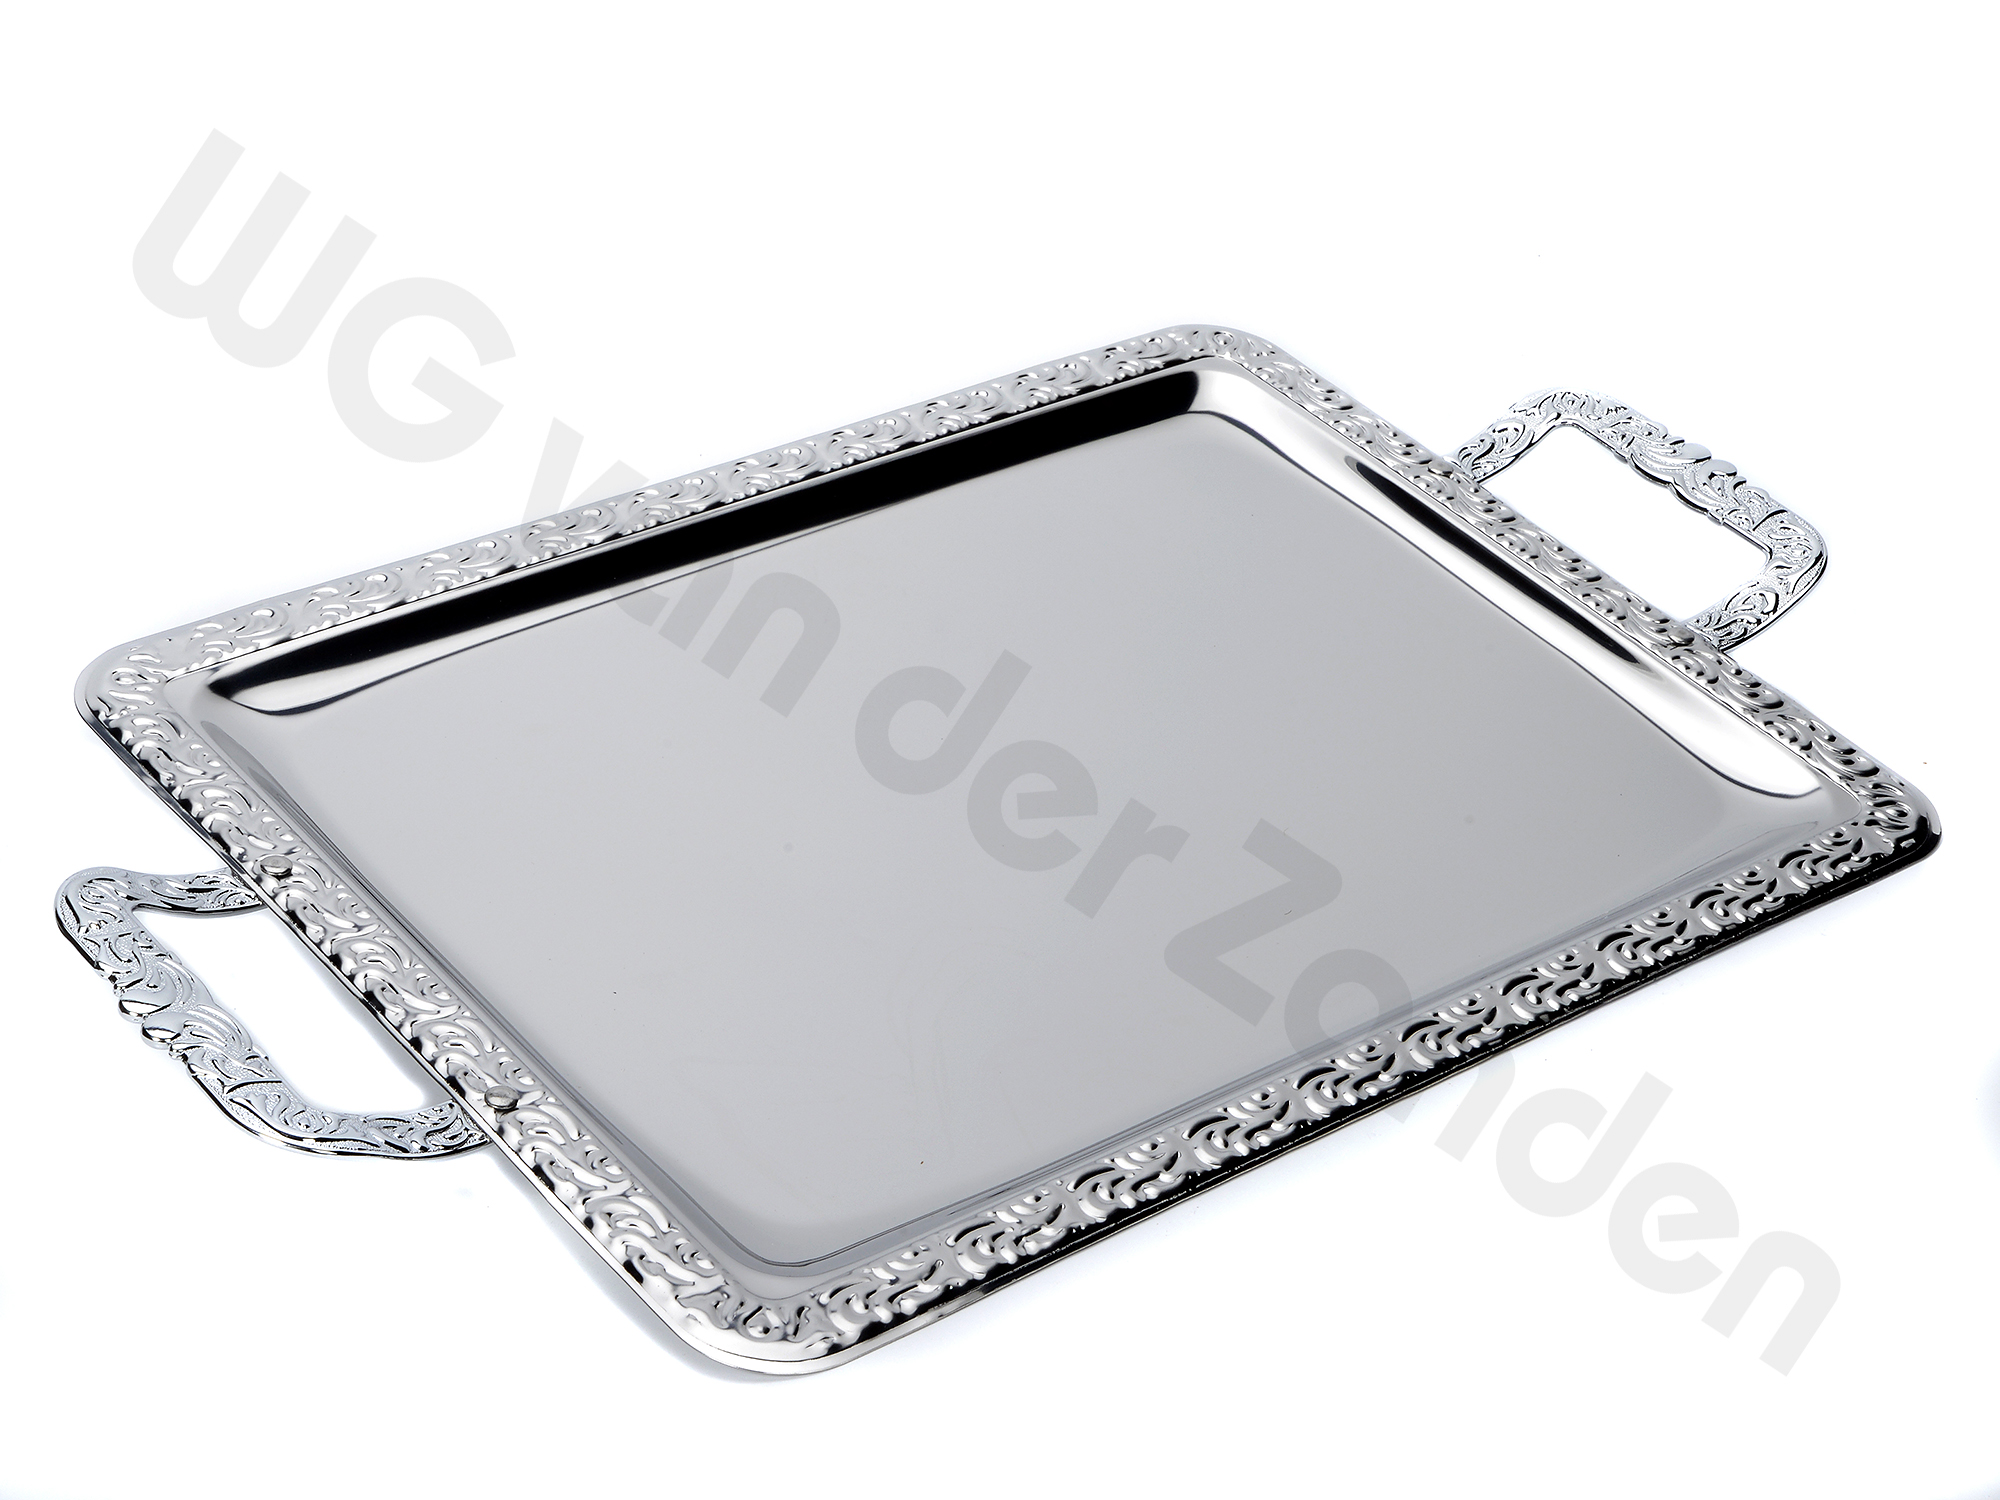 257151 SERVING TRAY S/S 52X31CM HANDLED